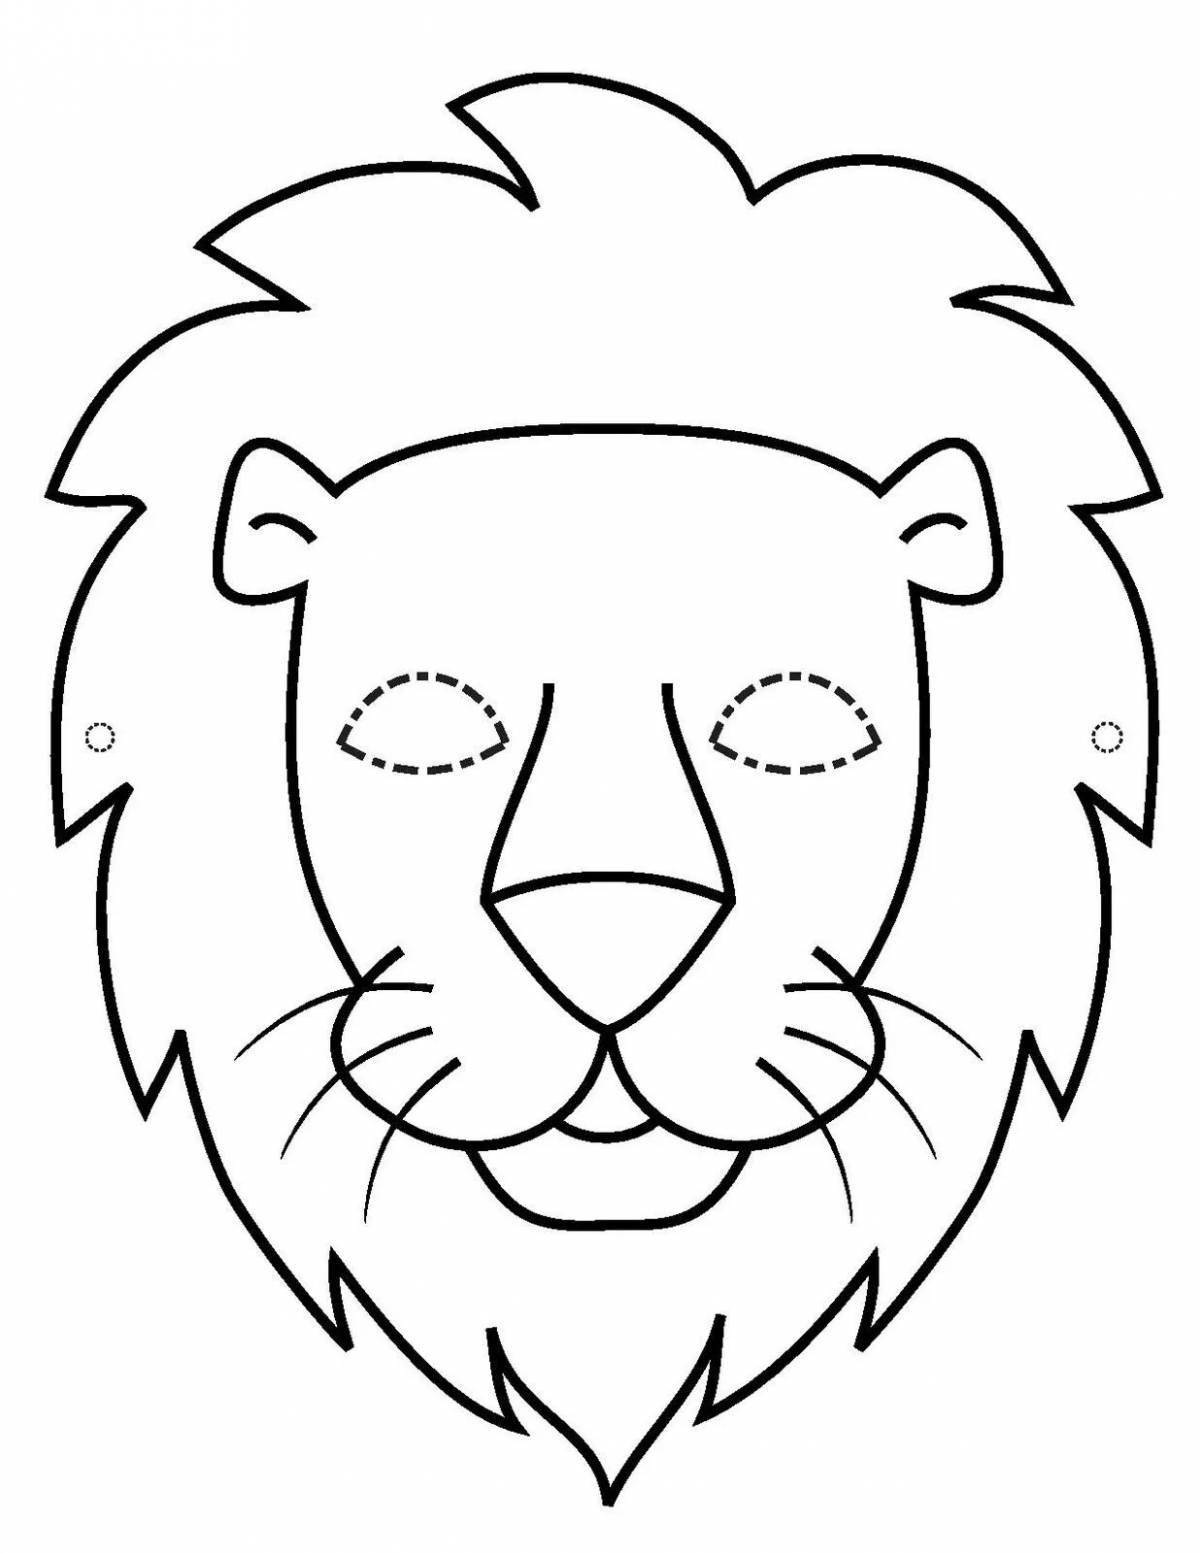 Decorated lion head coloring page